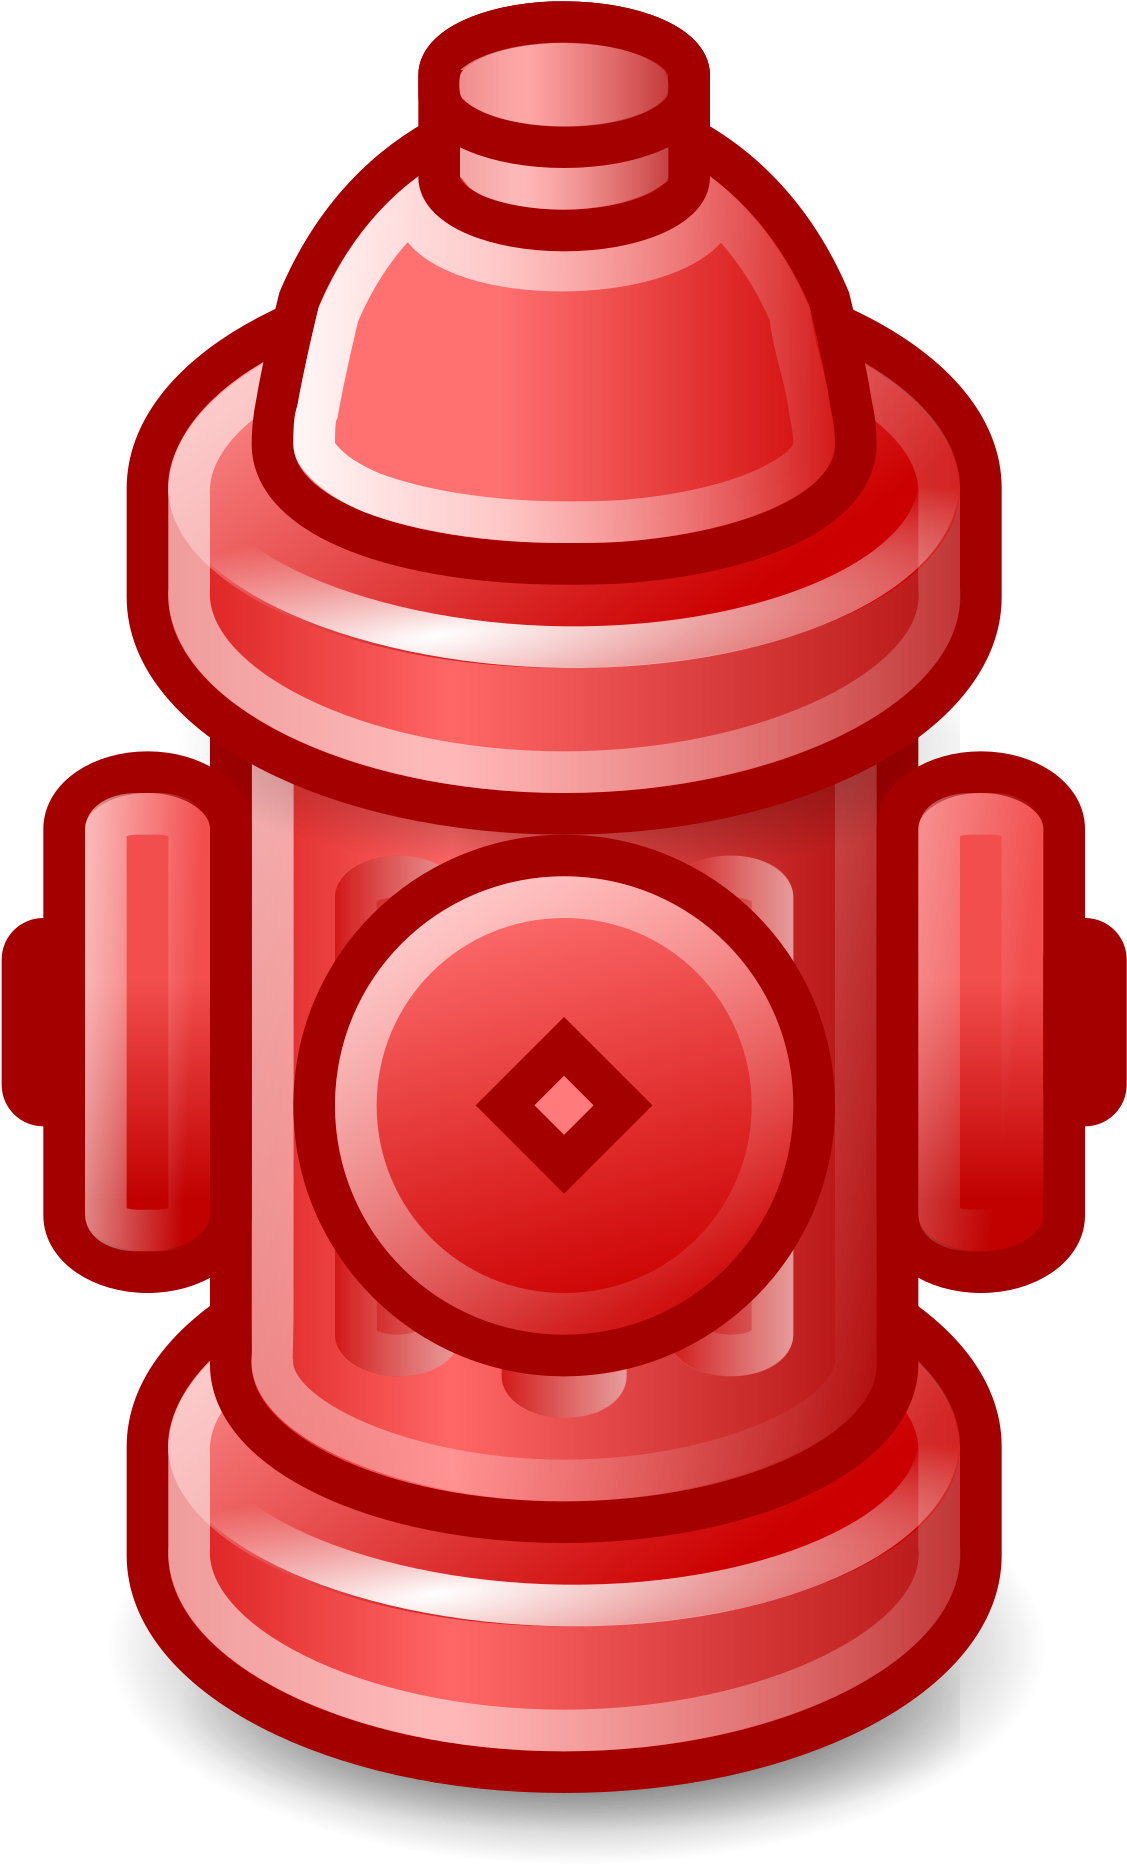 Open - Fire Hydrant Png (2000x2000)